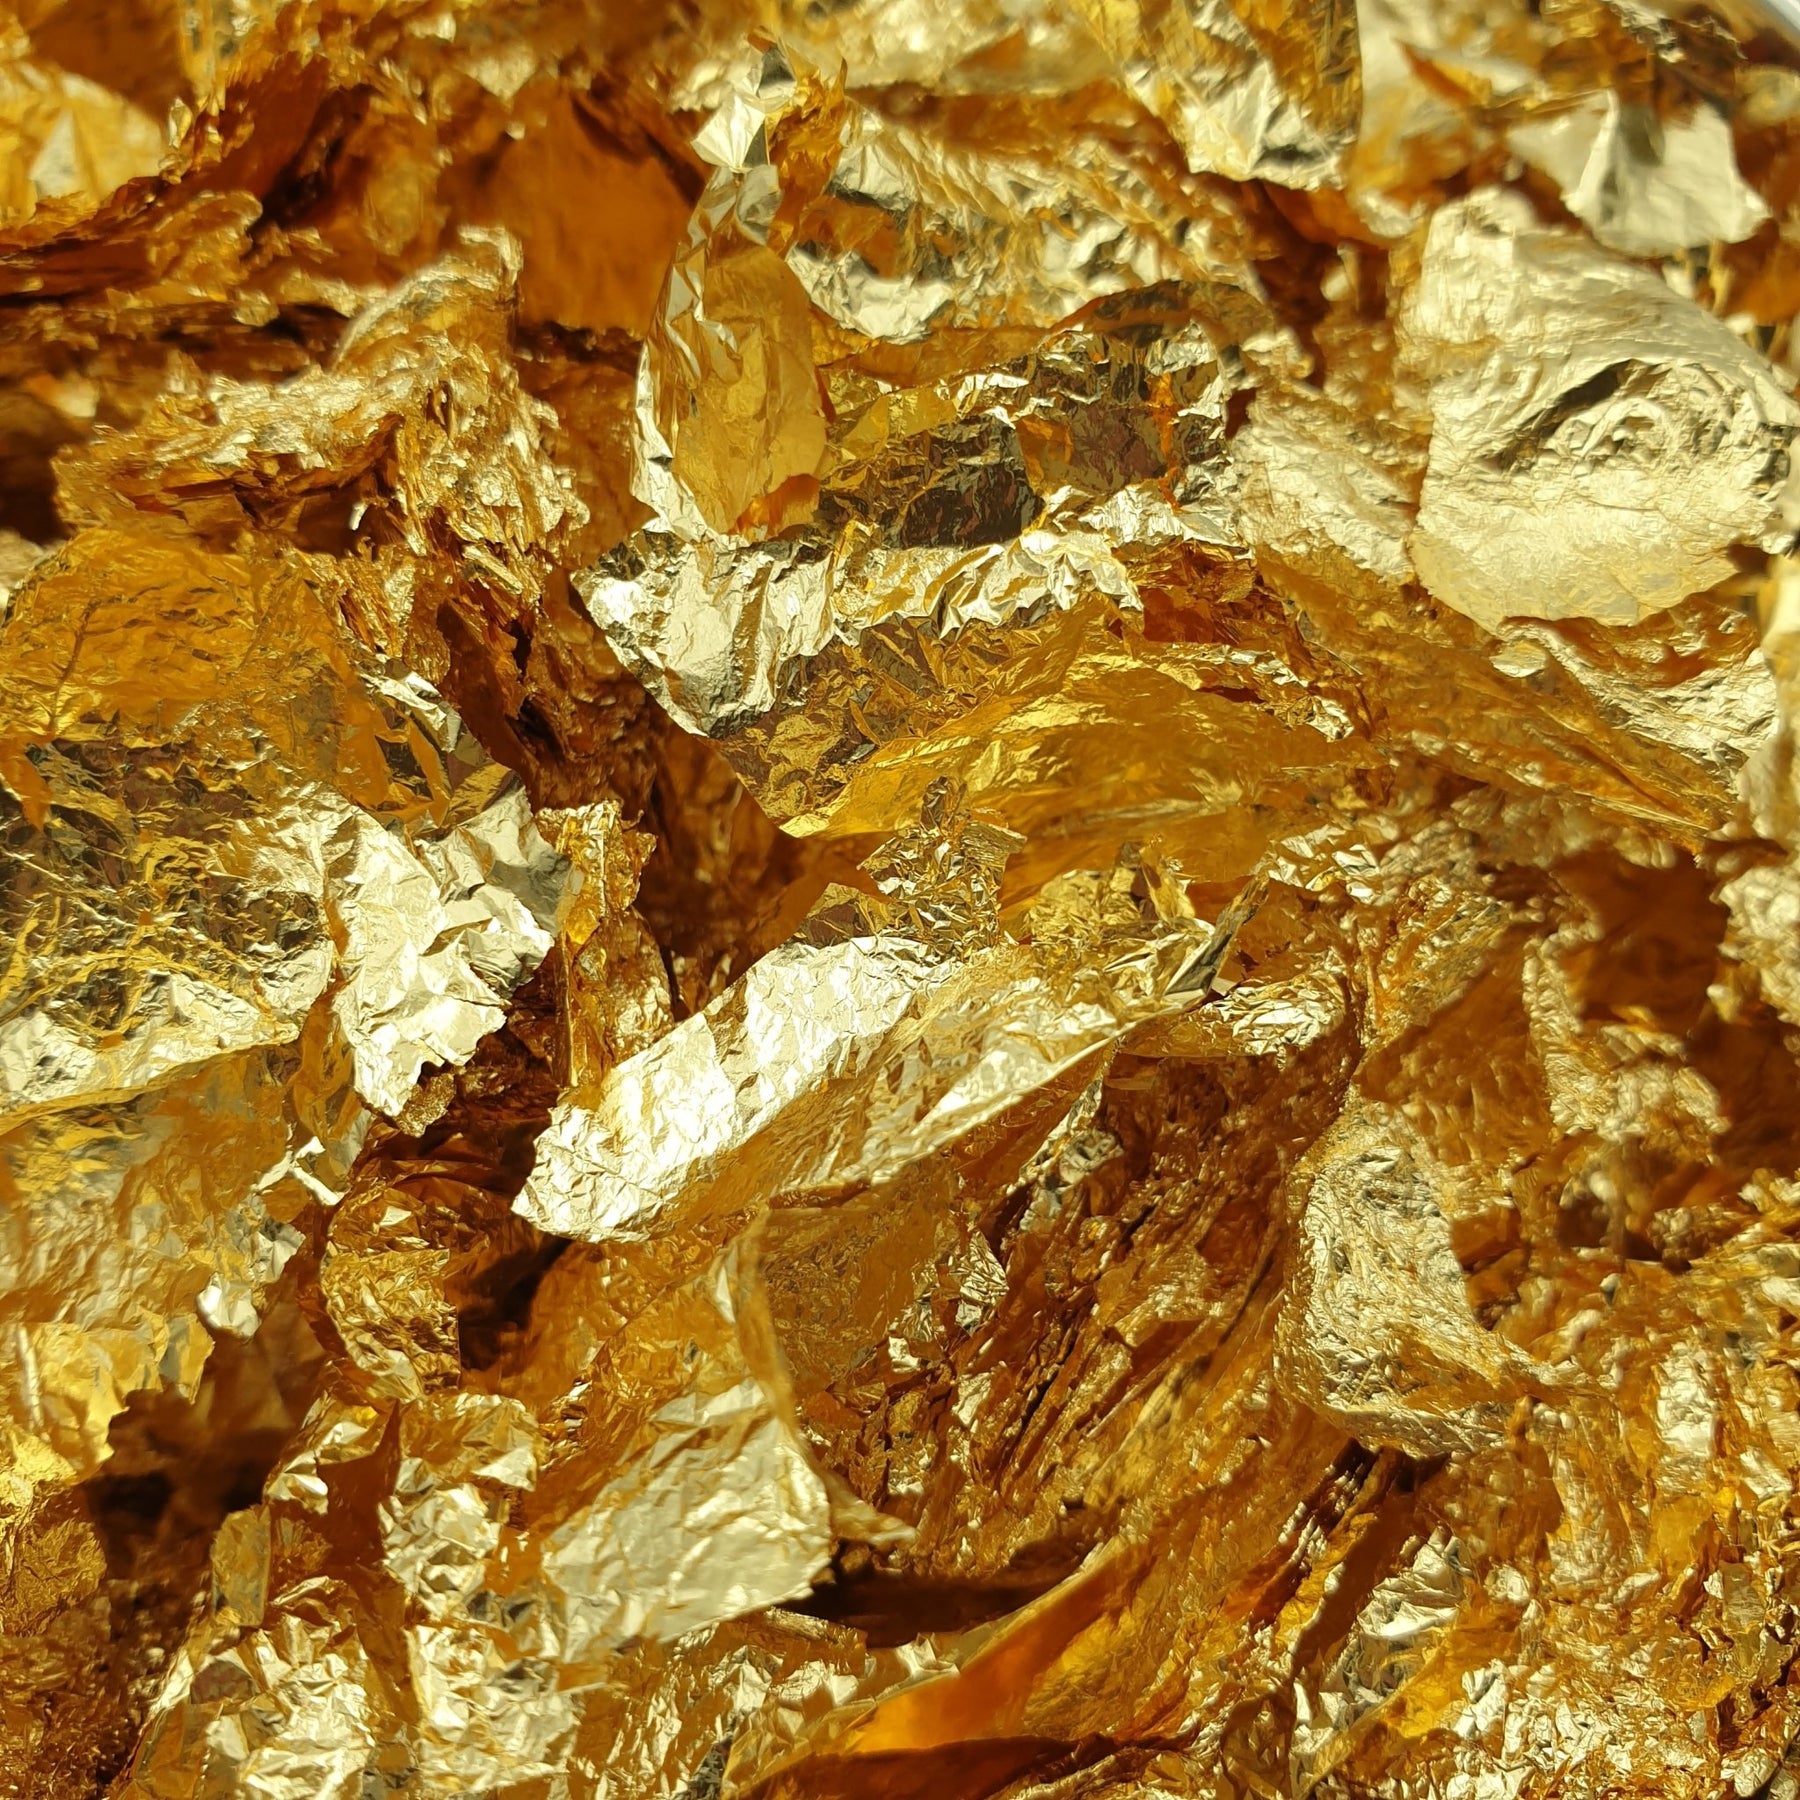 Foil Flakes for Resin - GOLD FLAKE - 10g — BALTIC DAY